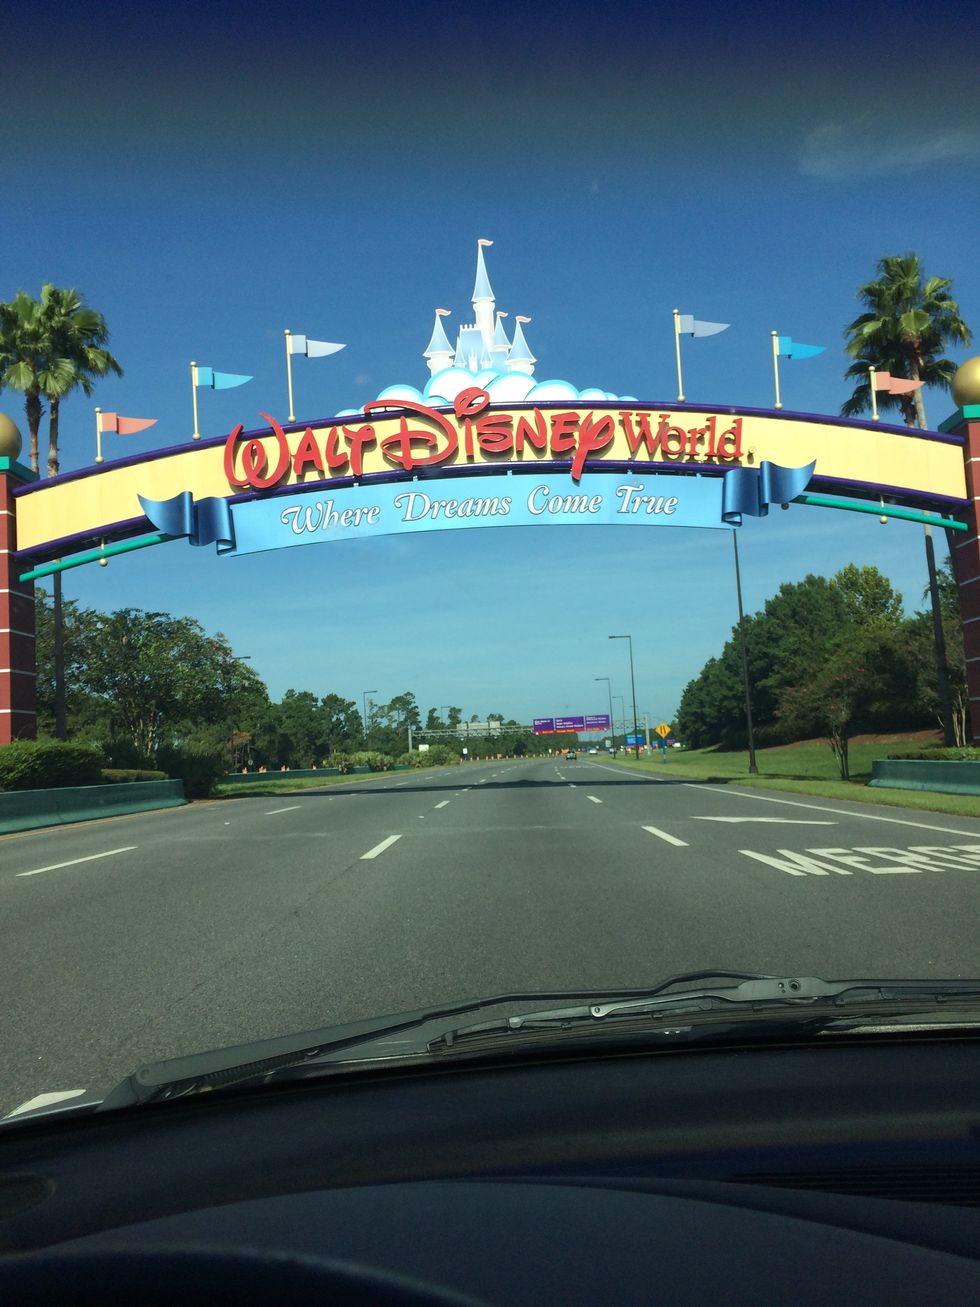 The Magic of the Disney College Program Experience